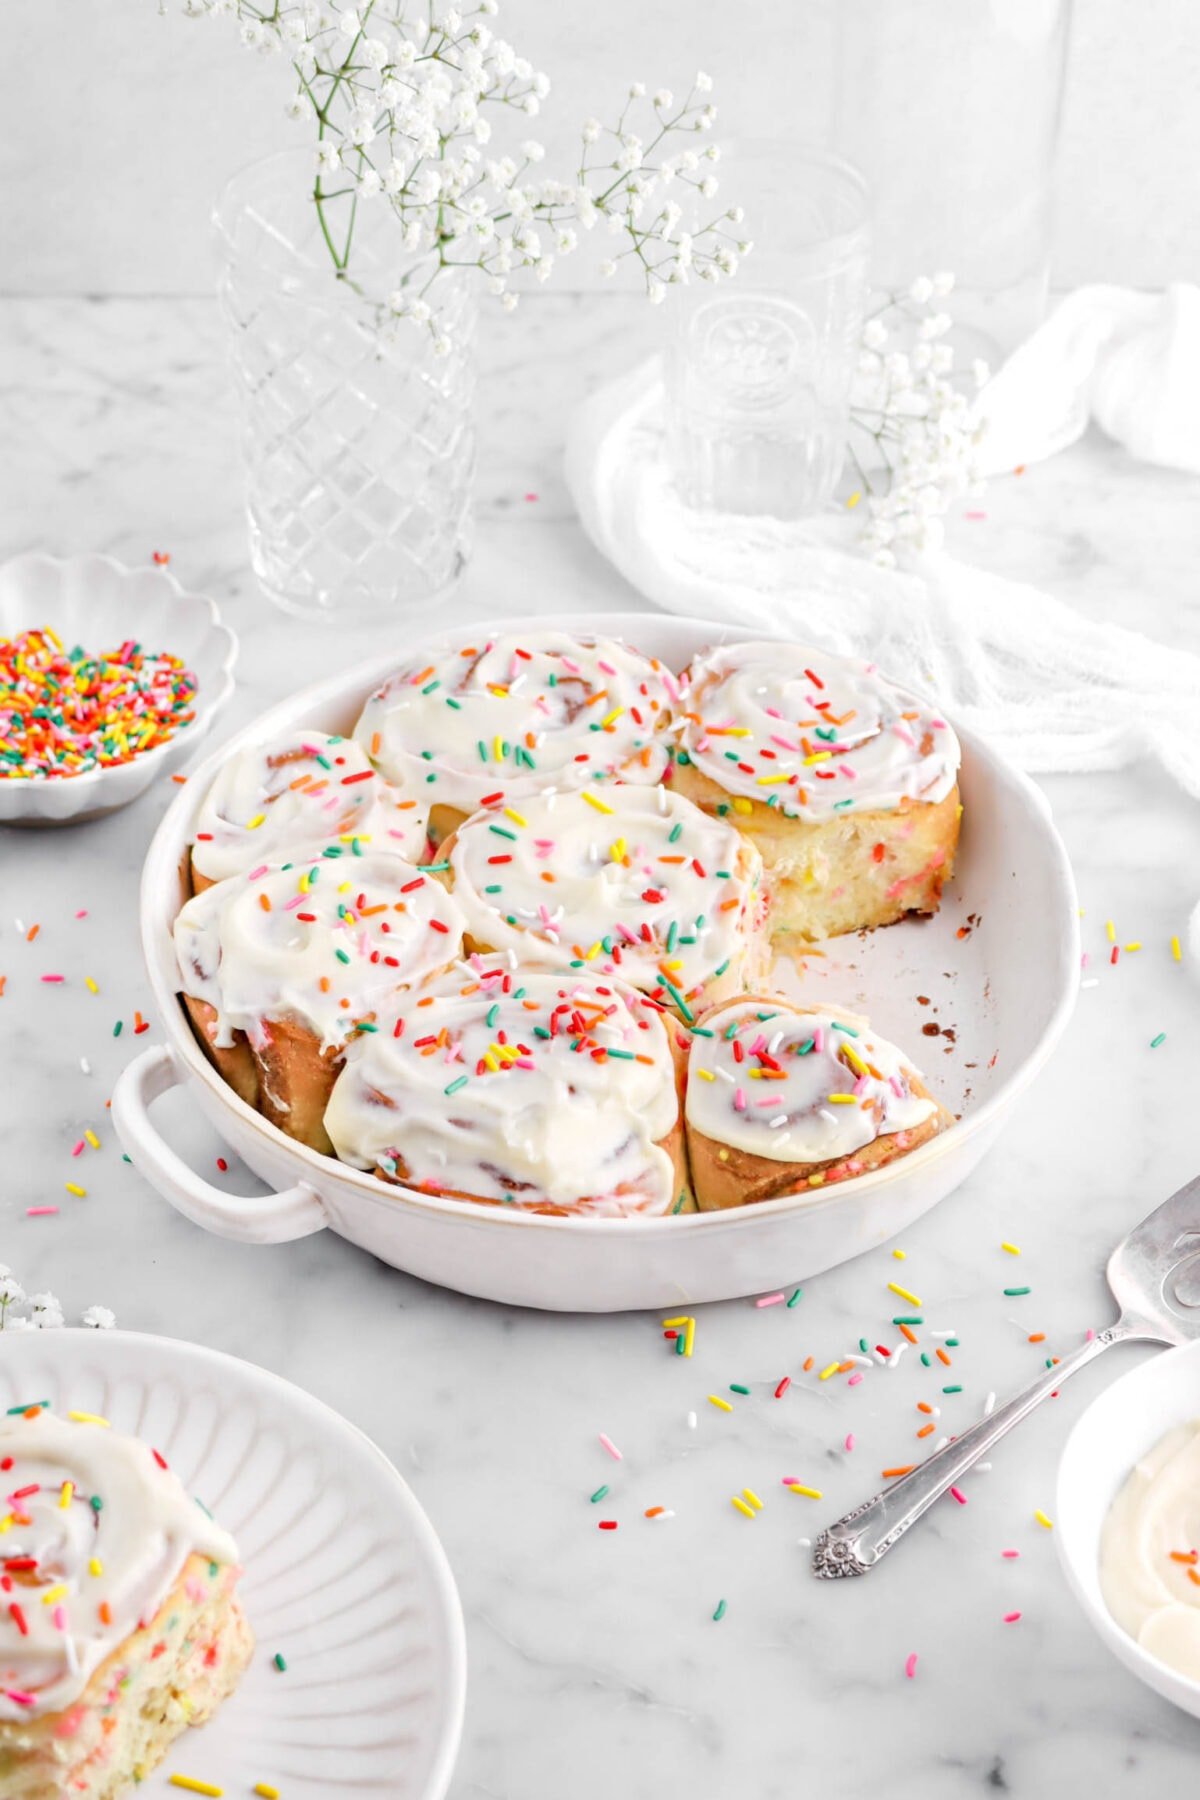 angled shot of frosted funfetti cinnamon rolls in round casserole with one cinnamon roll missing, with rainbow sprinkles around, a white cheese cloth, glasses, and white flowers behind on marble surface.